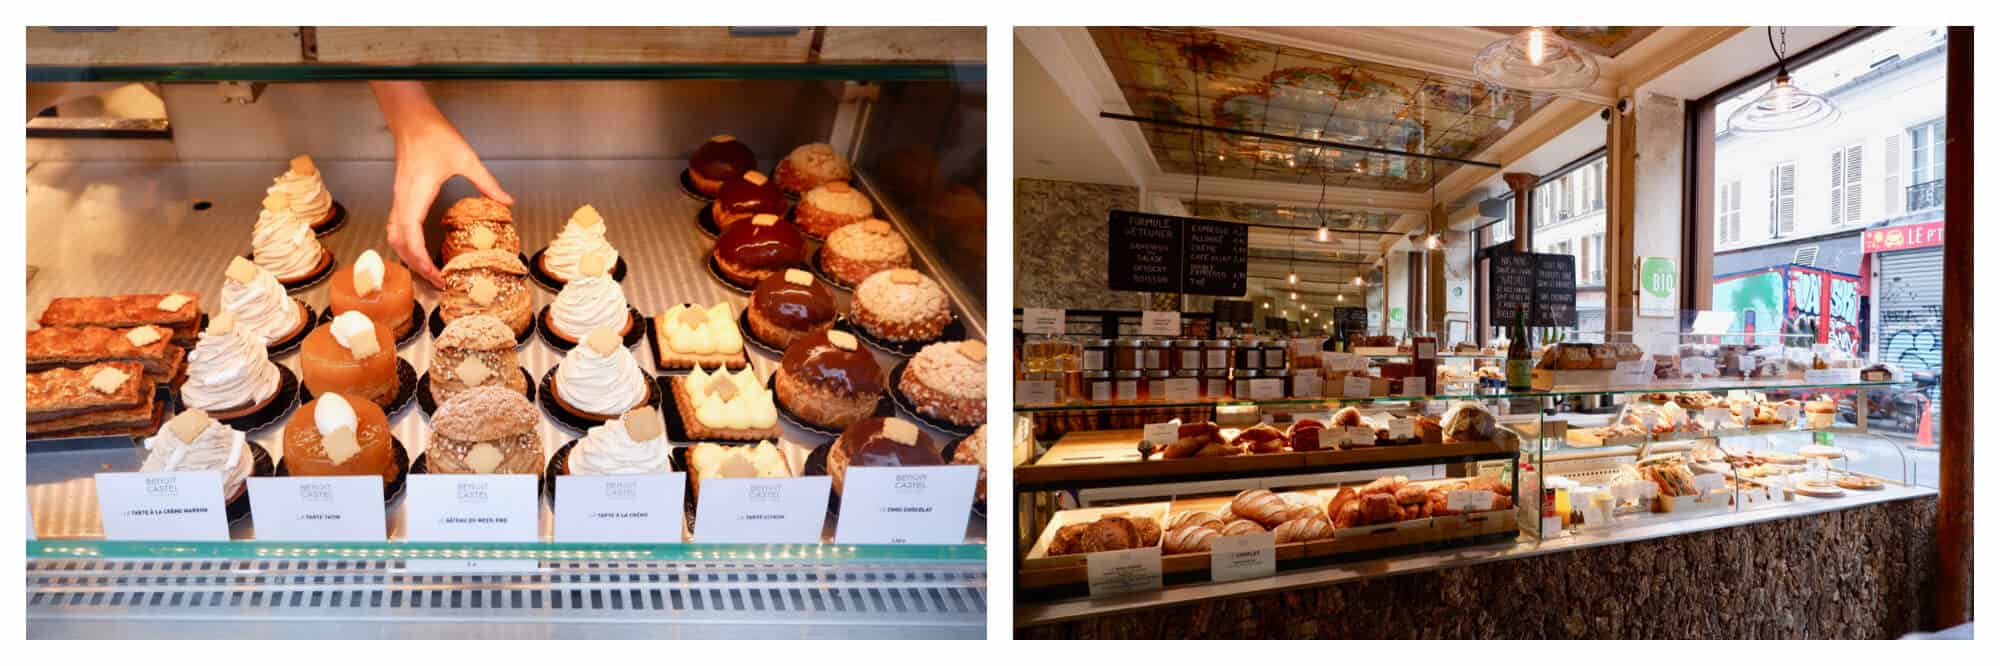 Left: the window display of a boulangerie with various types of patisseries. The sales assistant is picking up one of the patisseries. Right: the interior of the boulangerie. The glass display cases are full of bread and pastries. The back wall is mirrored and the vintage art nouveau roof is reflected.